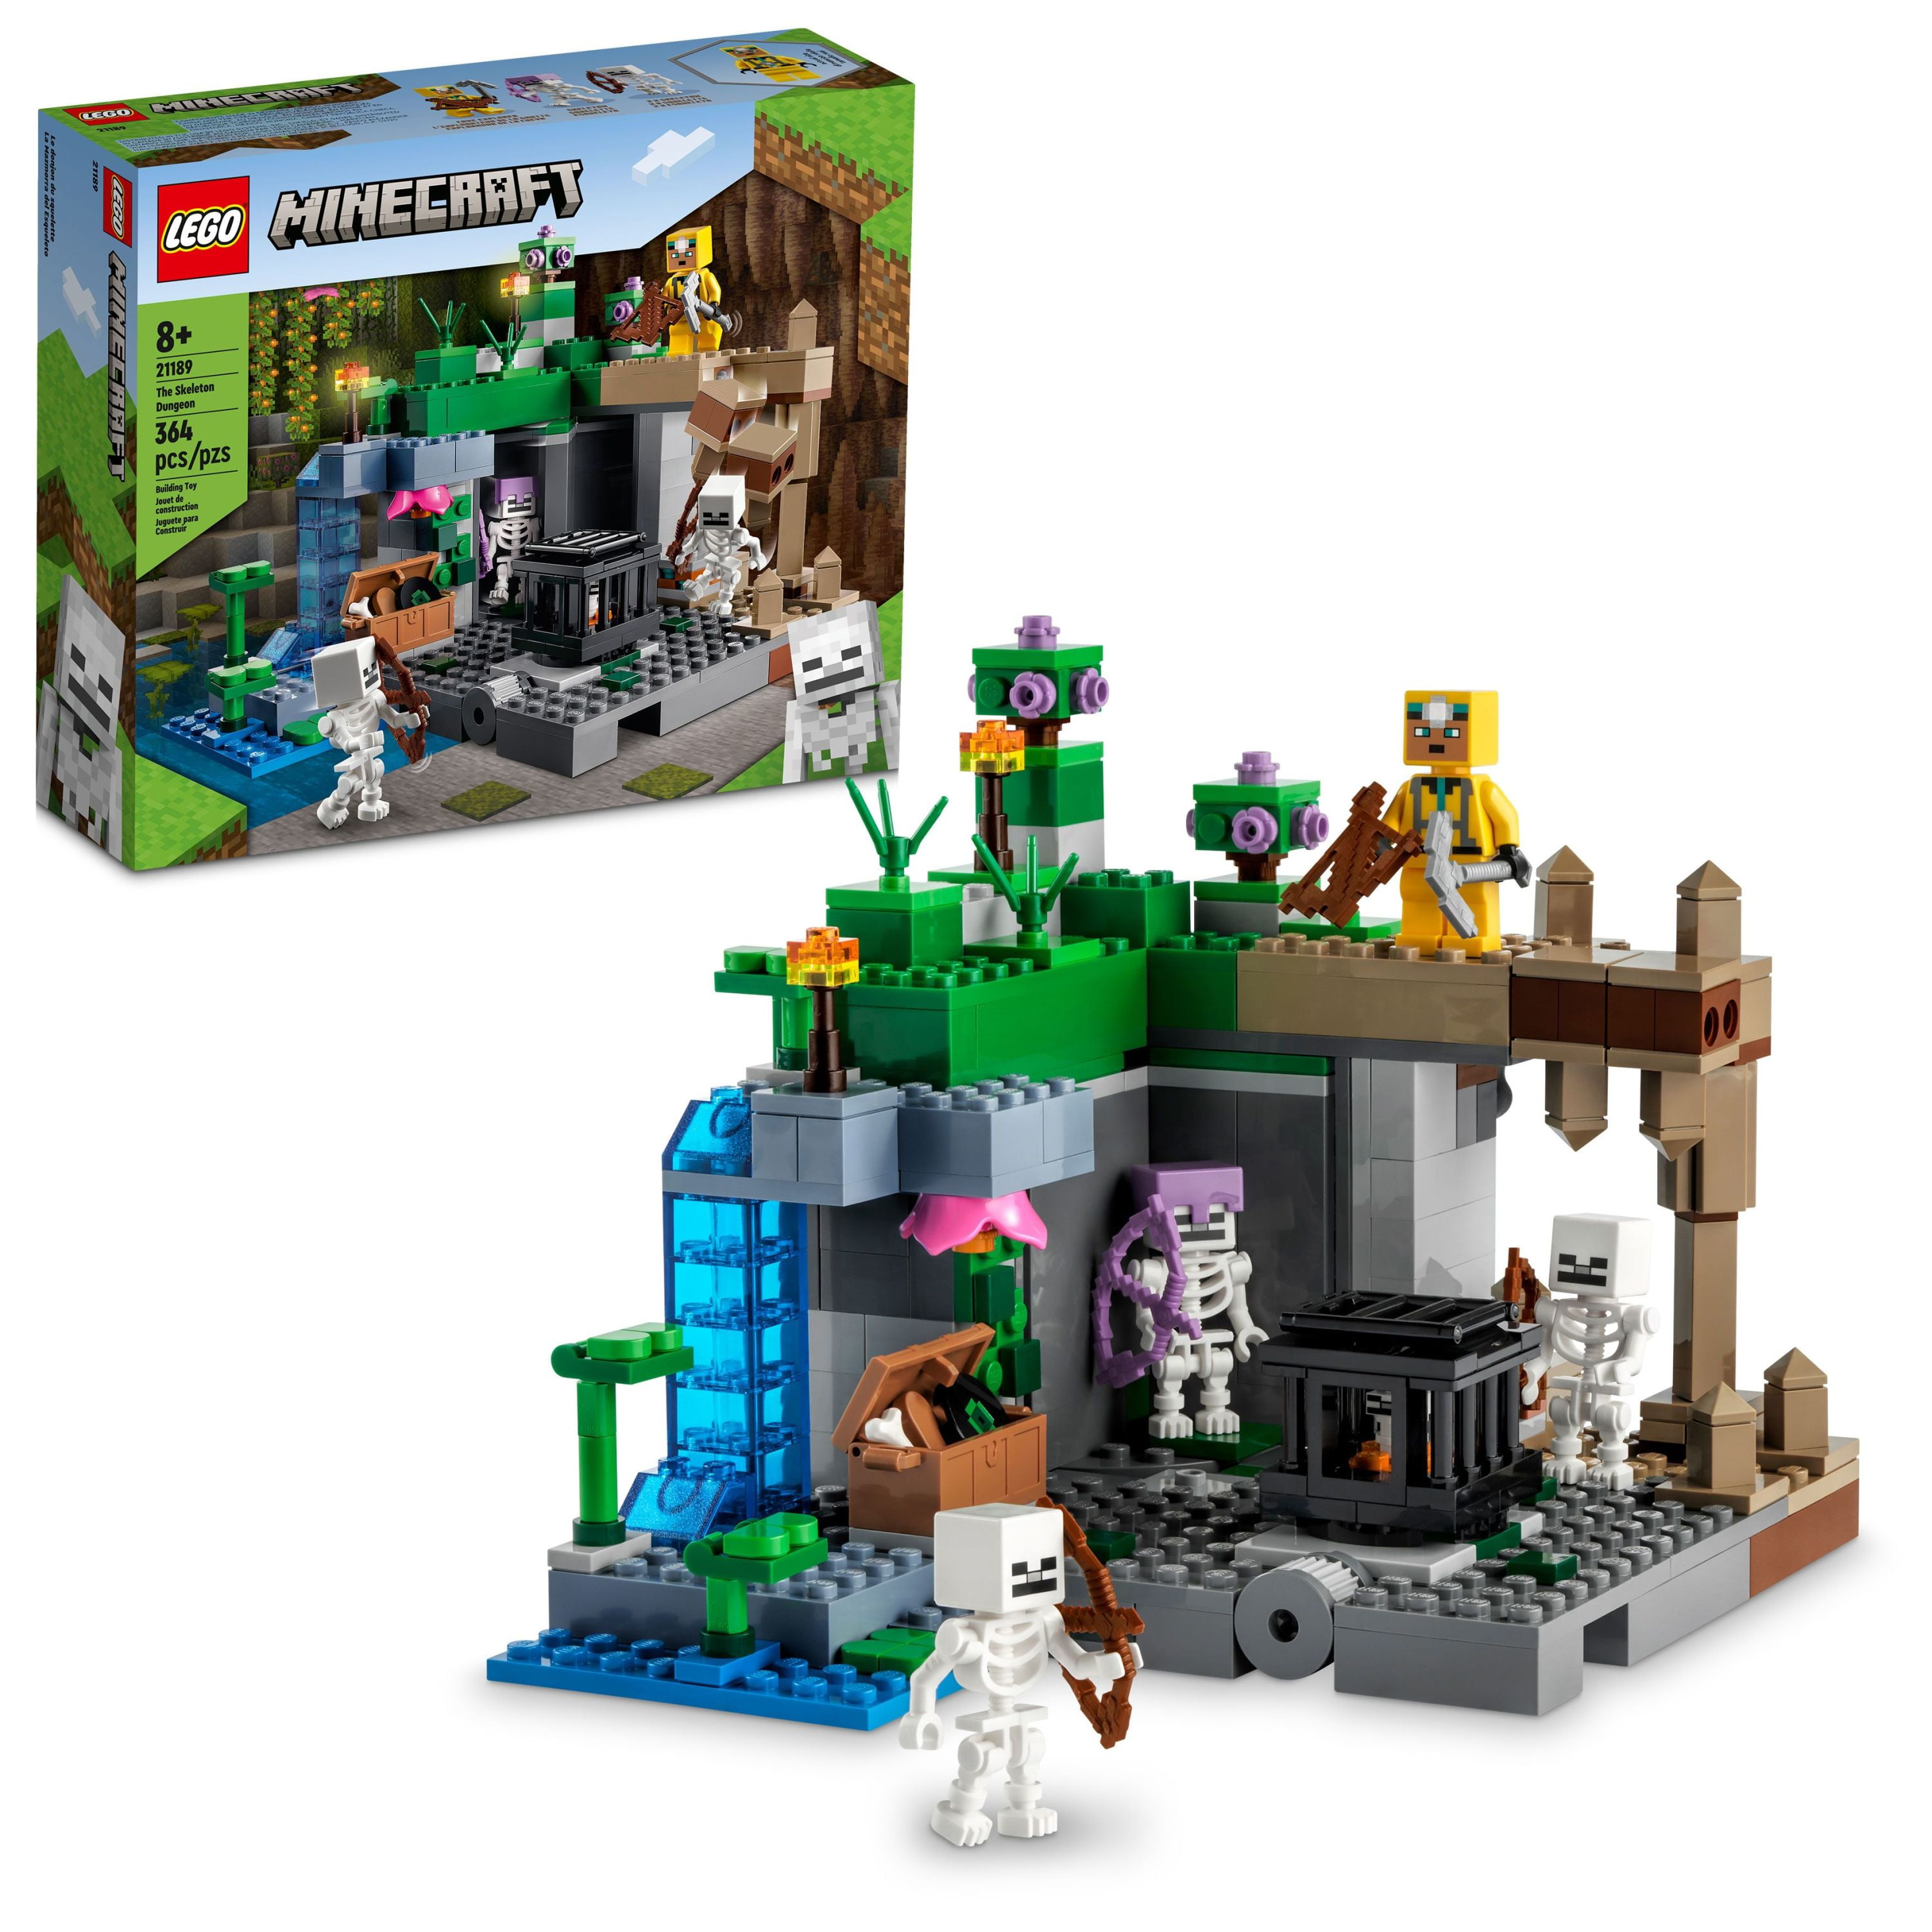 LEGO Minecraft The Skeleton Dungeon Set, 21189 Construction Toy for Kids with Caves, Mobs and with Crossbow - Walmart.com